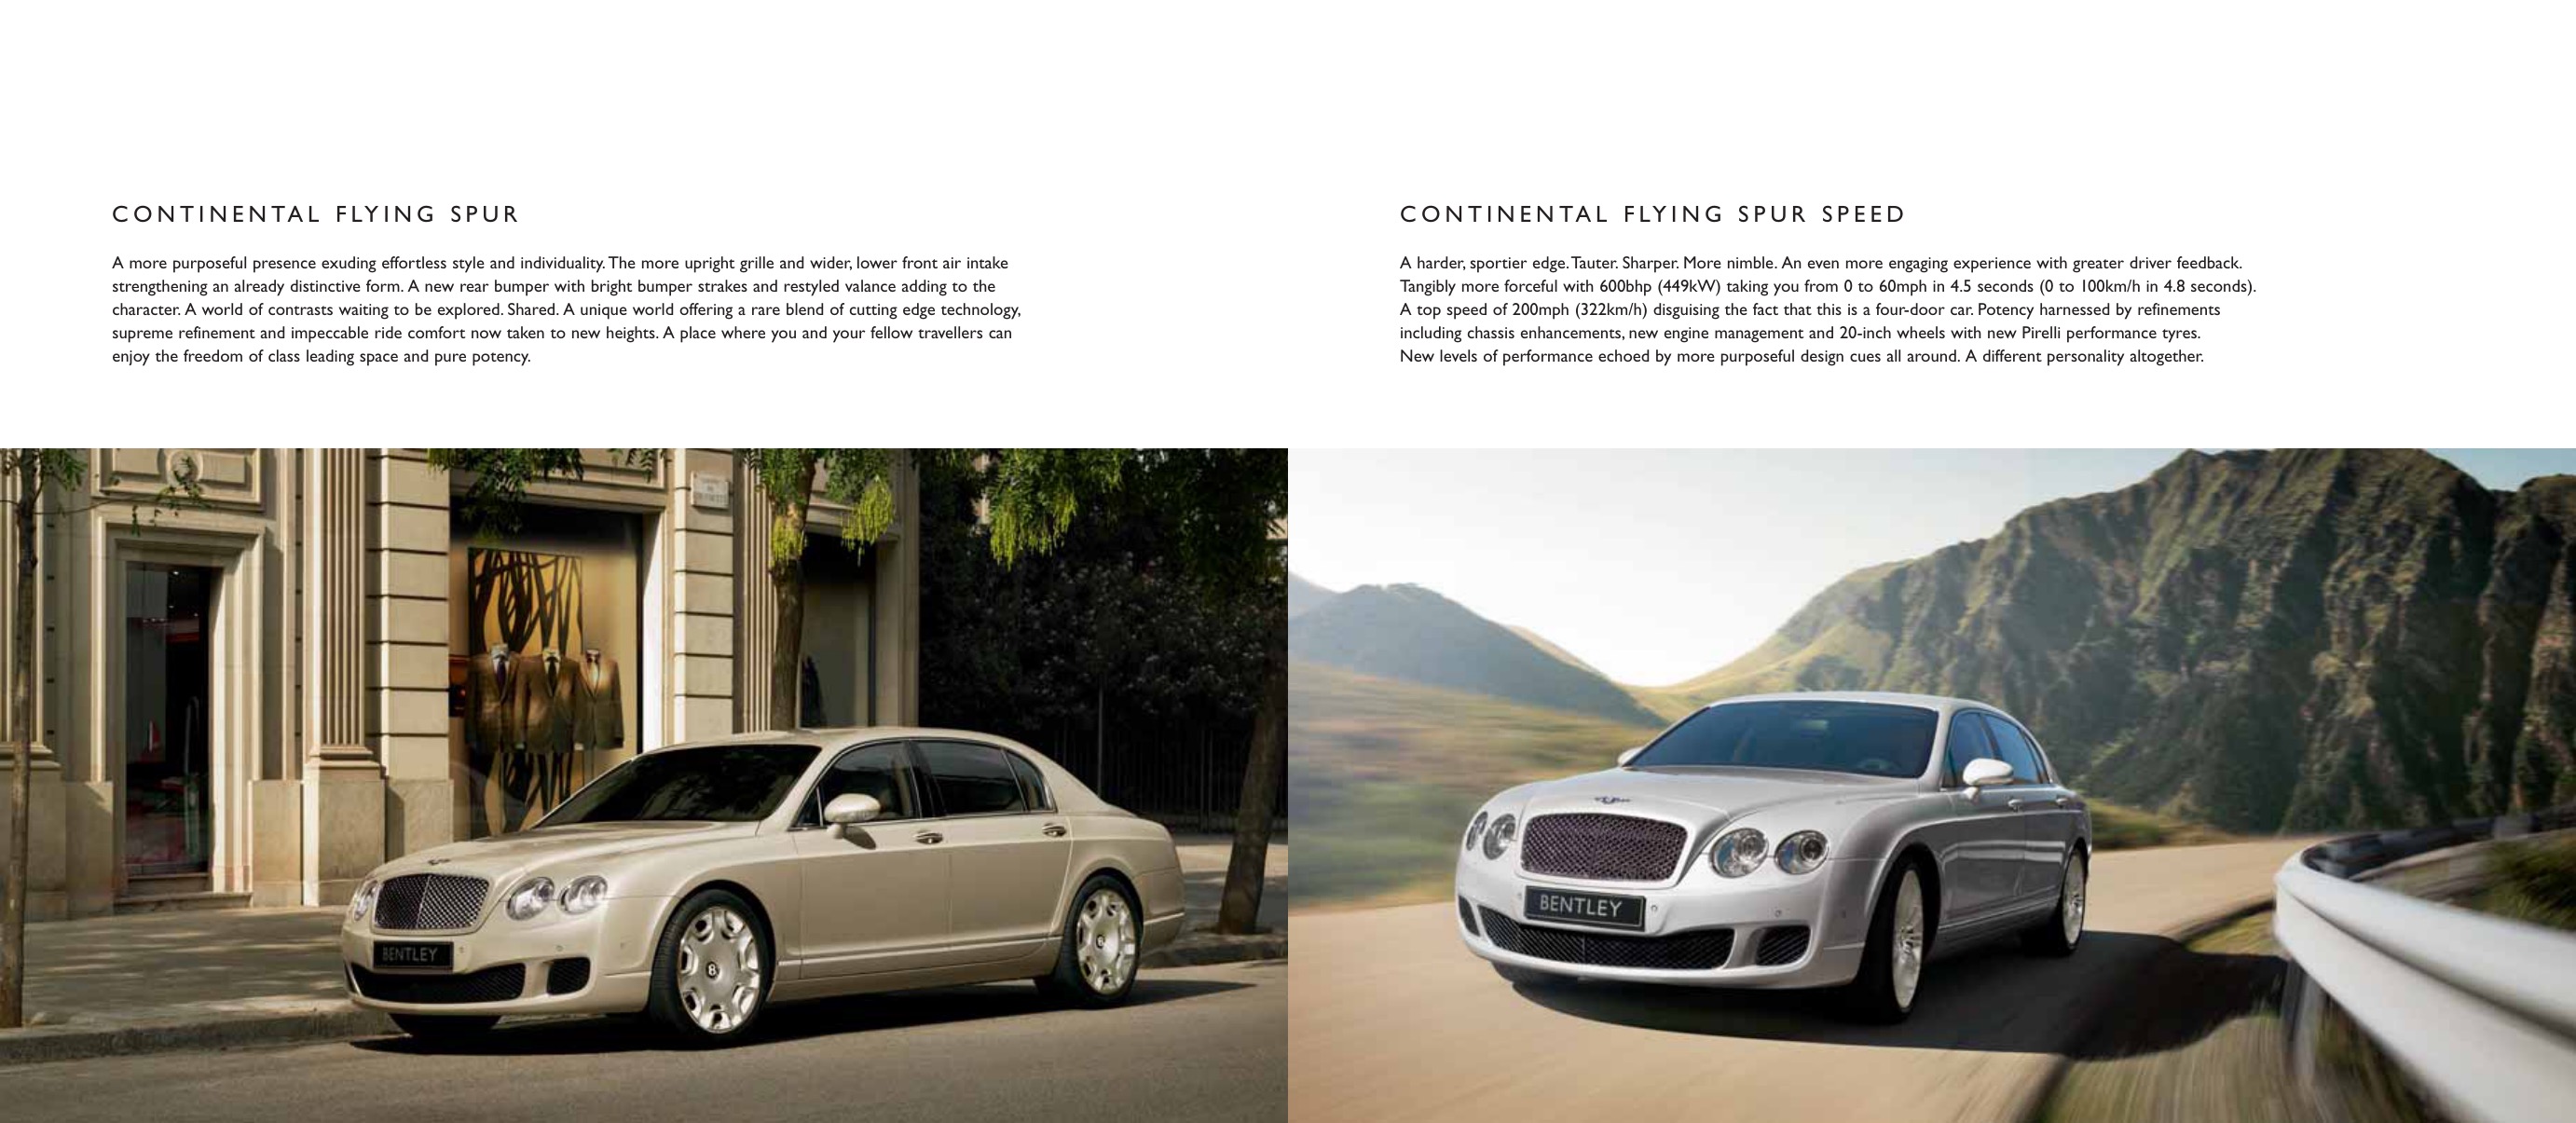 2009 Bentley Continental Flying Spur Brochure Page 18